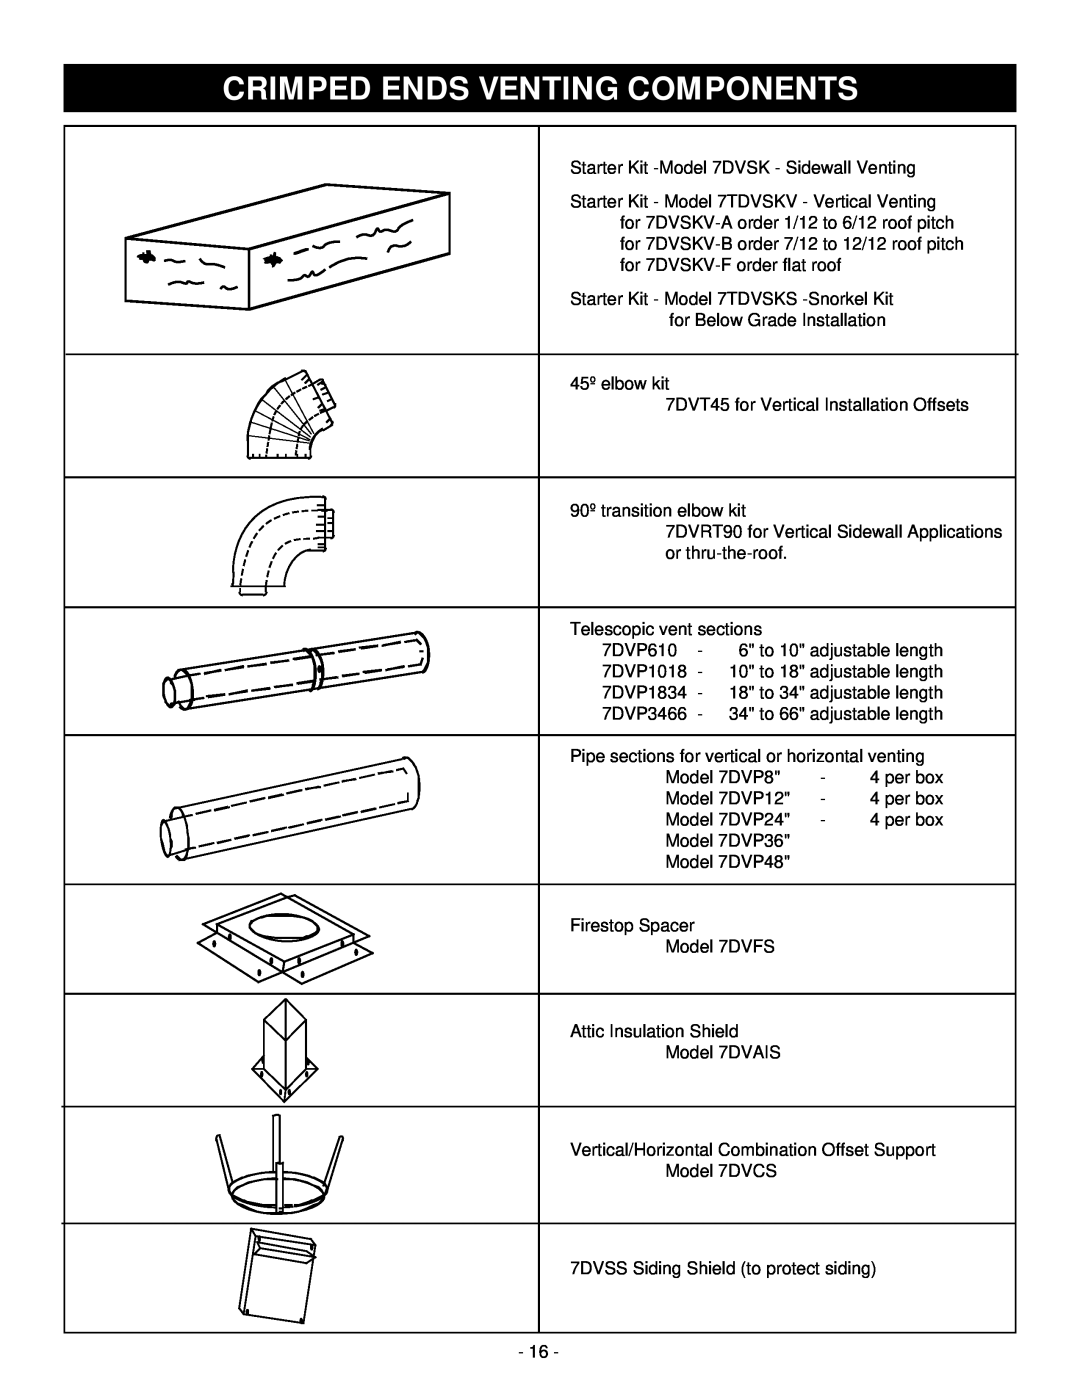 Vermont Casting D232 installation instructions Crimped Ends Venting Components 